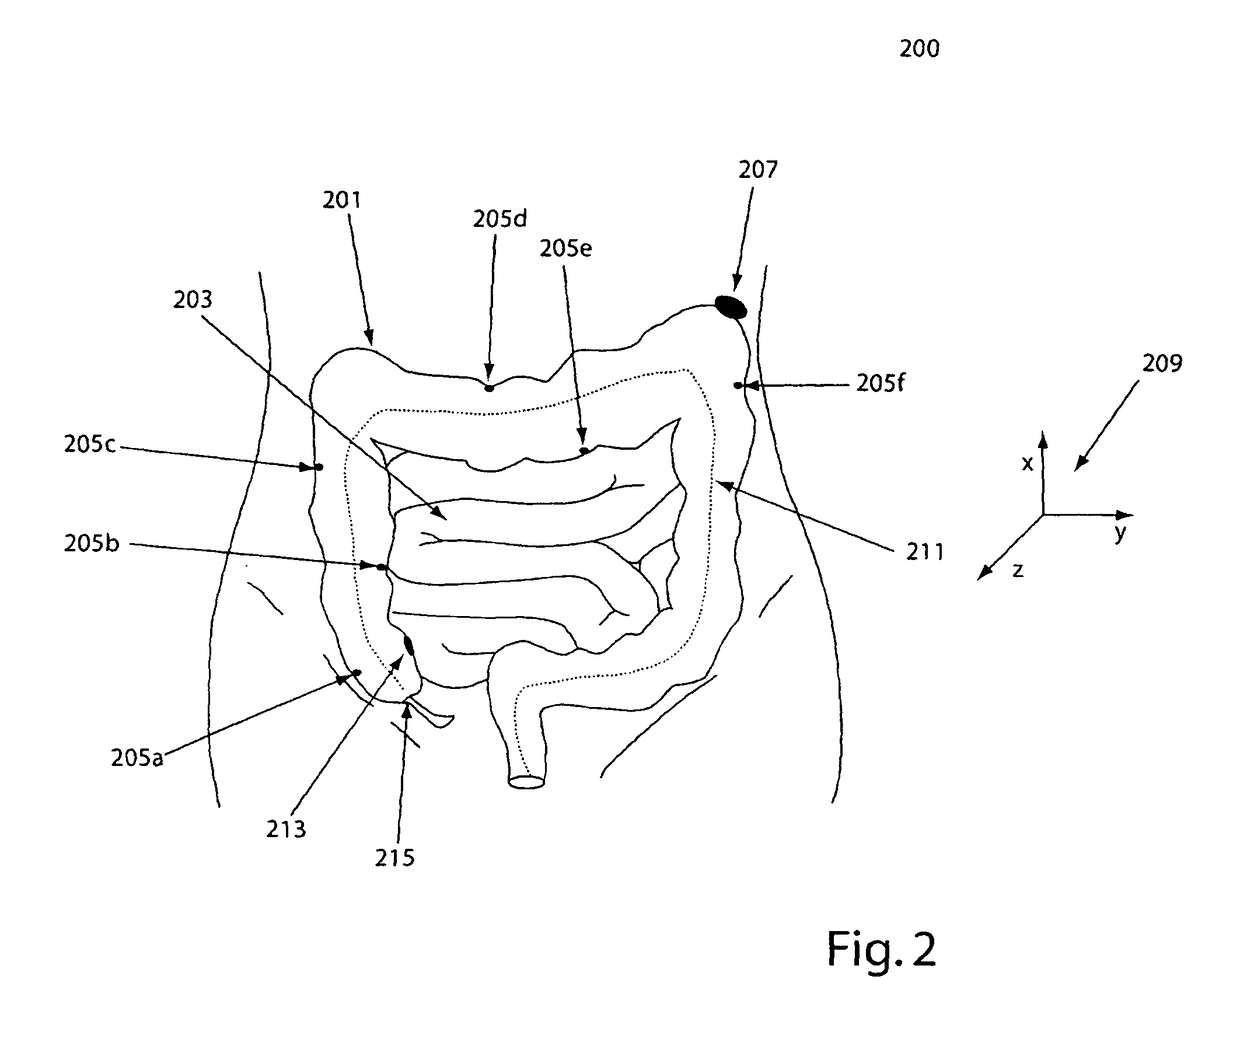 System, method and devices for navigated flexible endoscopy